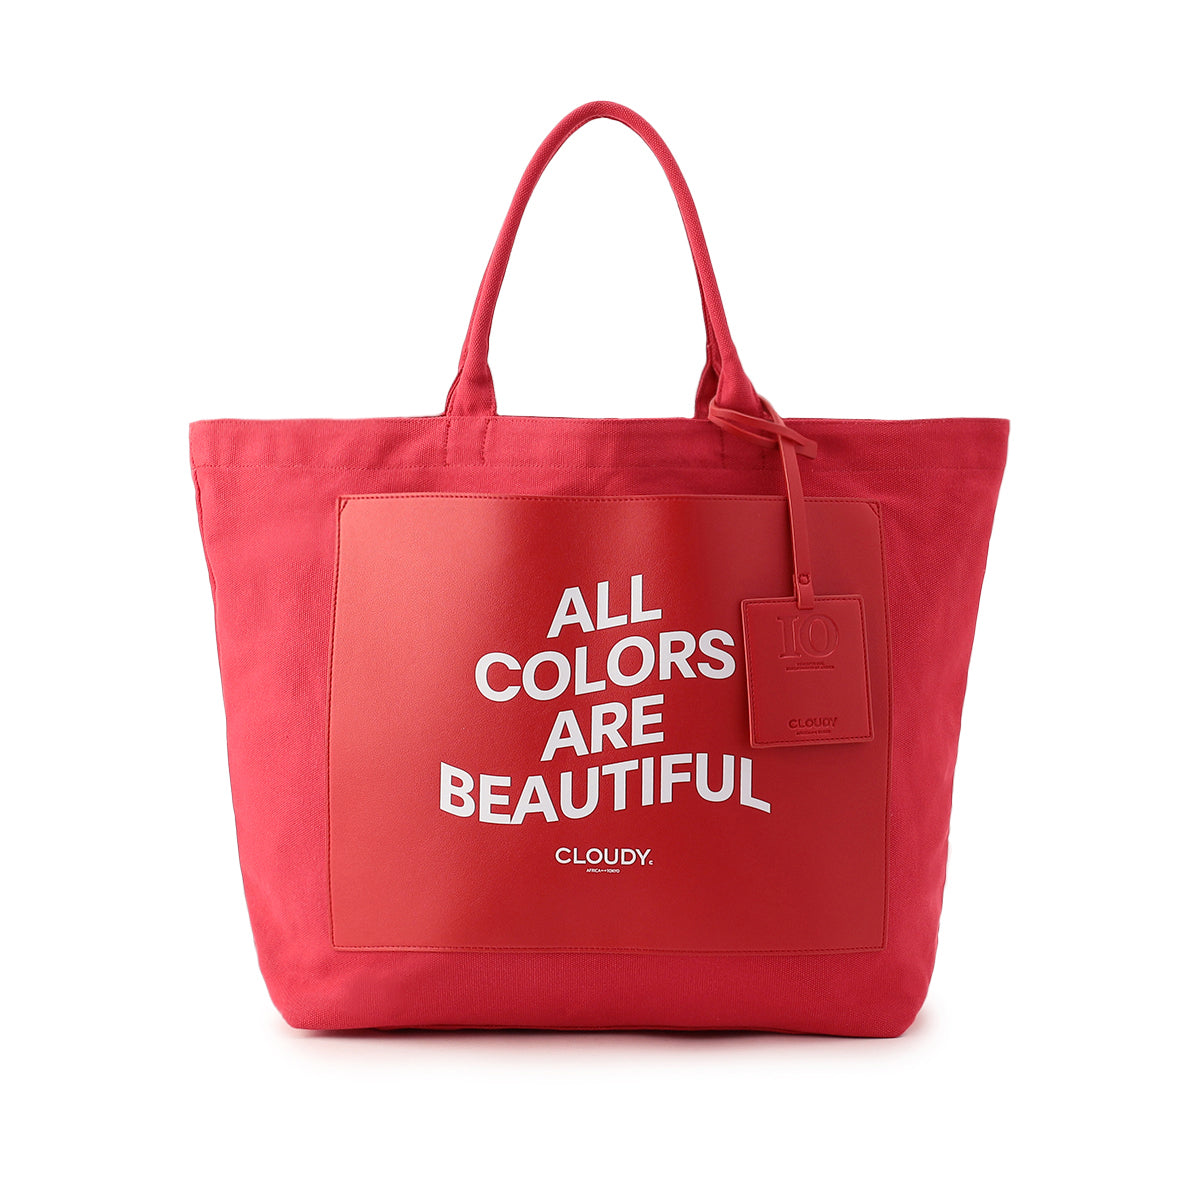 【EC限定】Colored Canvas Tote (Large)RED | バッグ | CLOUDY ...